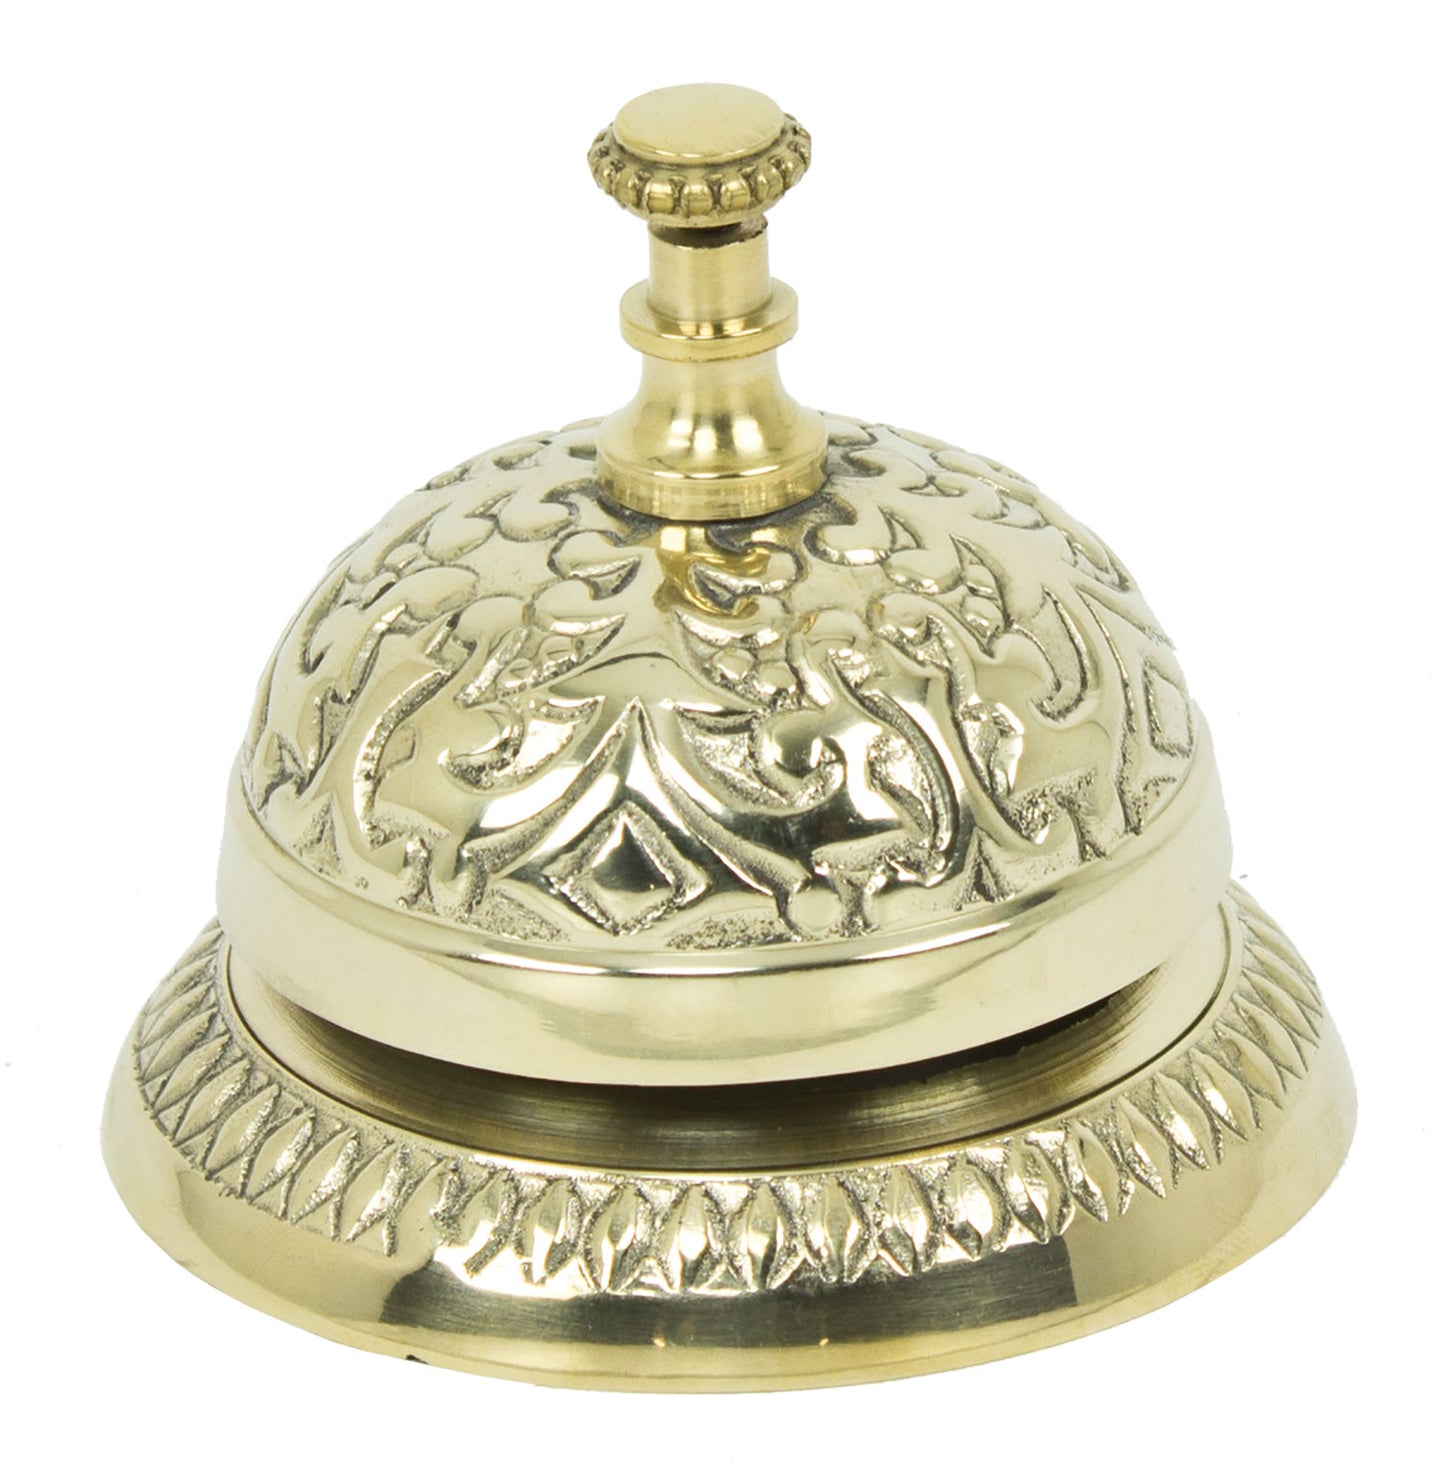 Brass victorian style front desk bell